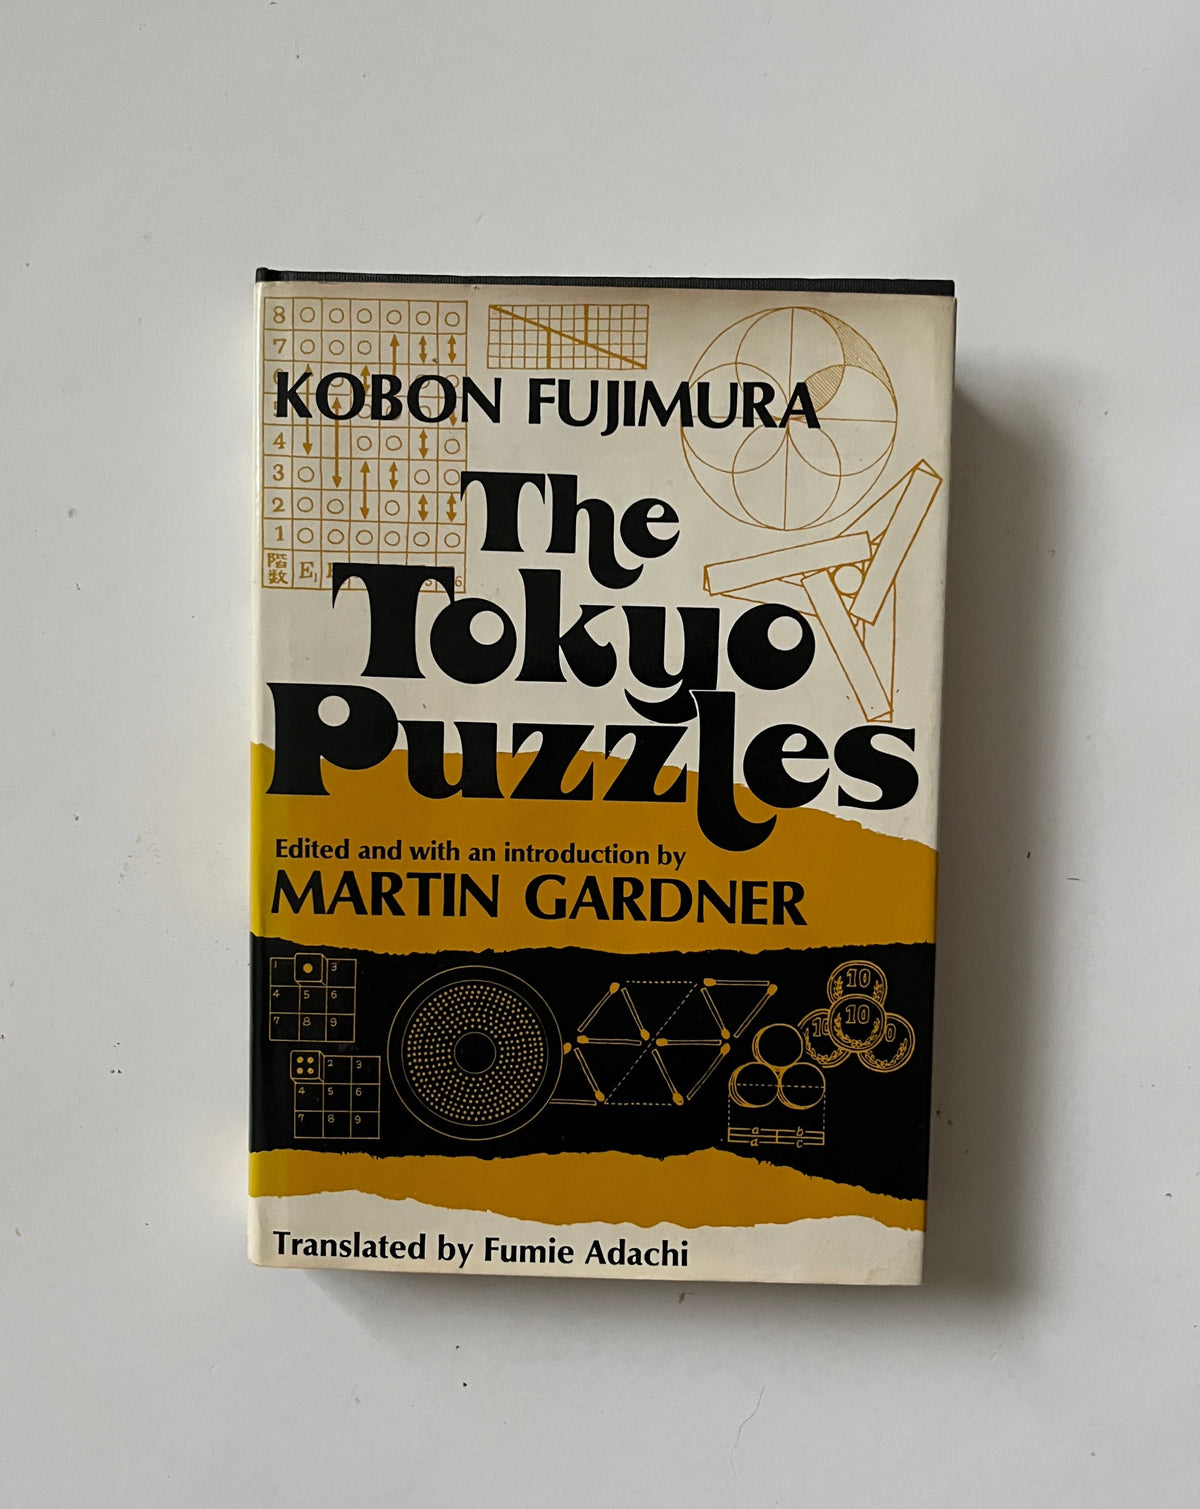 The Tokyo Puzzles by Kobon Fukimura translated by Fumie Adachi